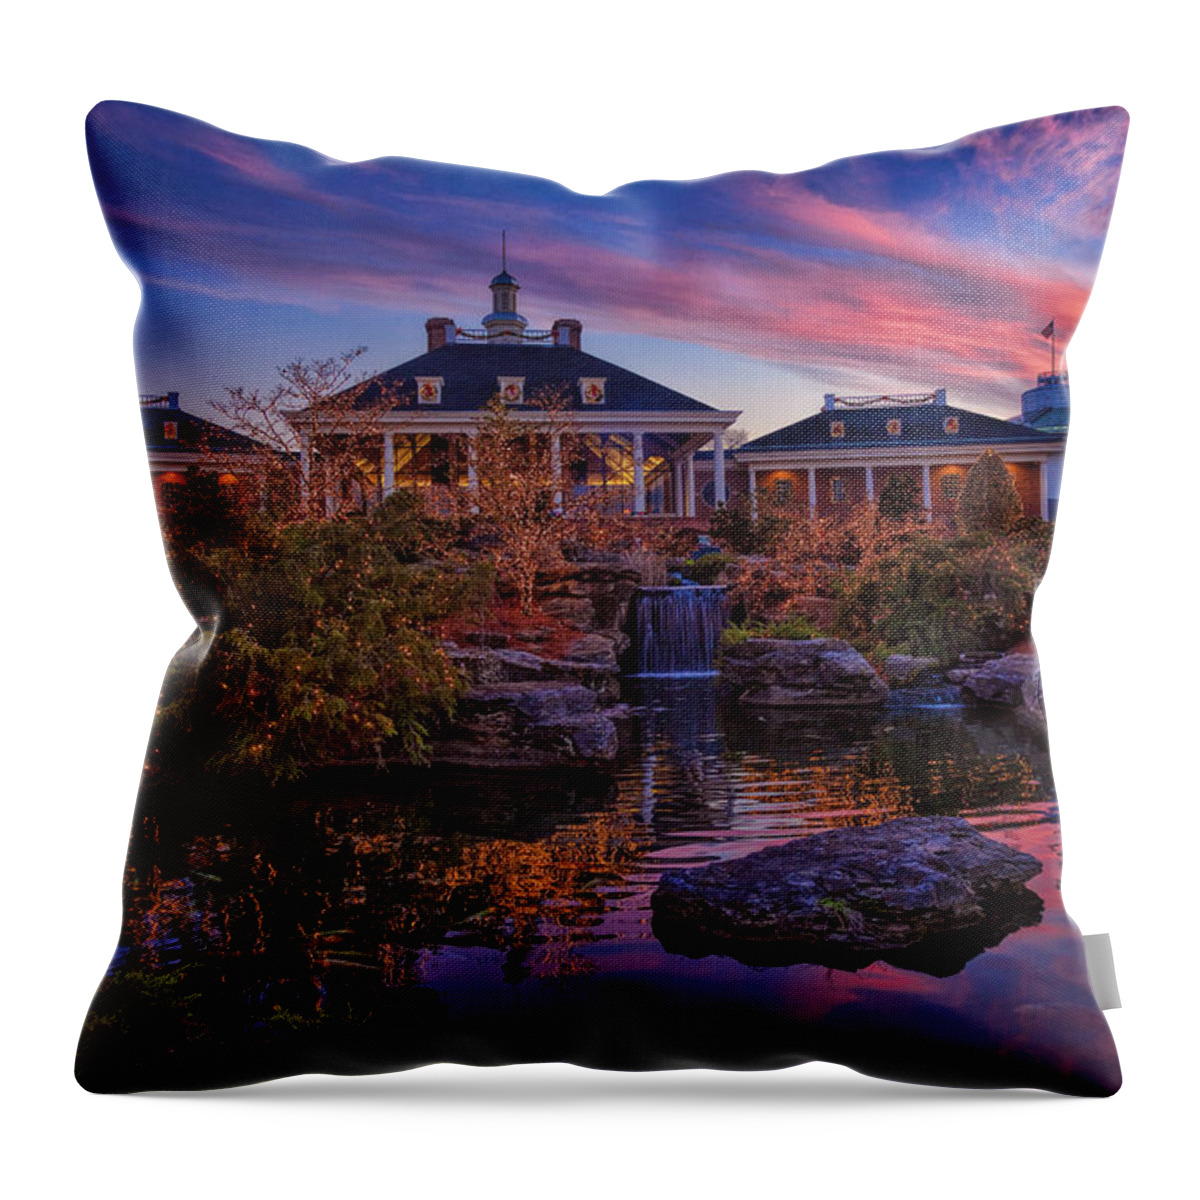 Gaylord Throw Pillow featuring the photograph Opryland Hotel by Diana Powell